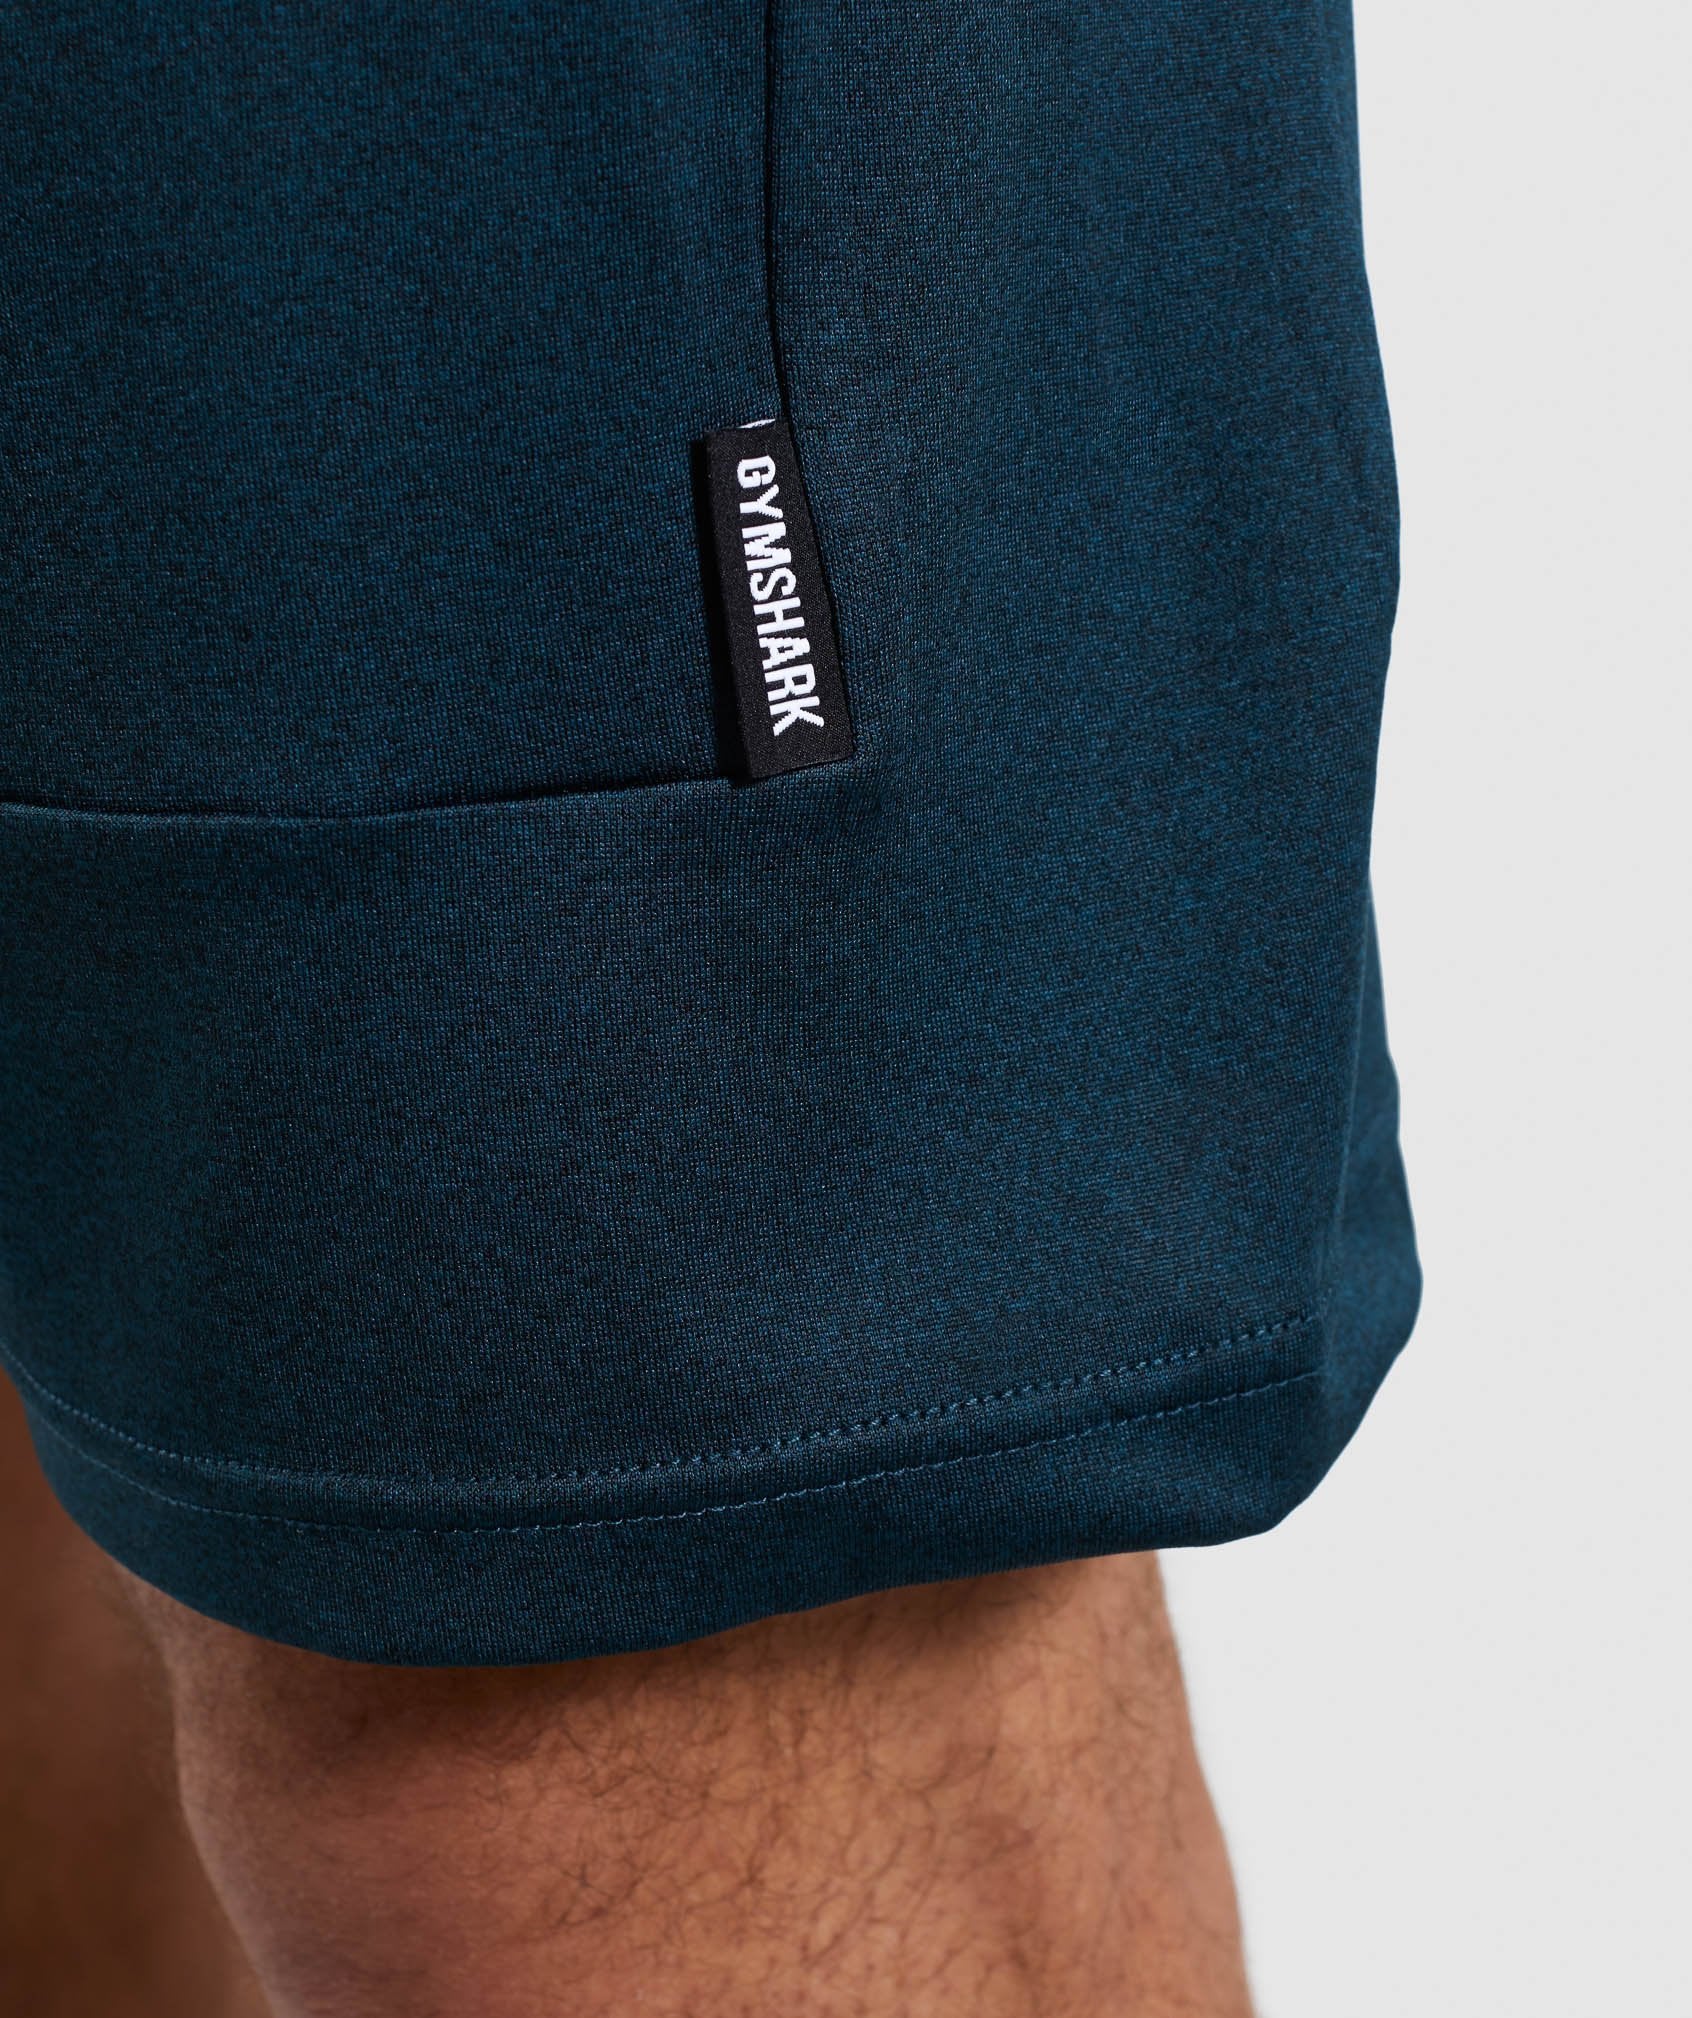 Element Shorts in Teal - view 5